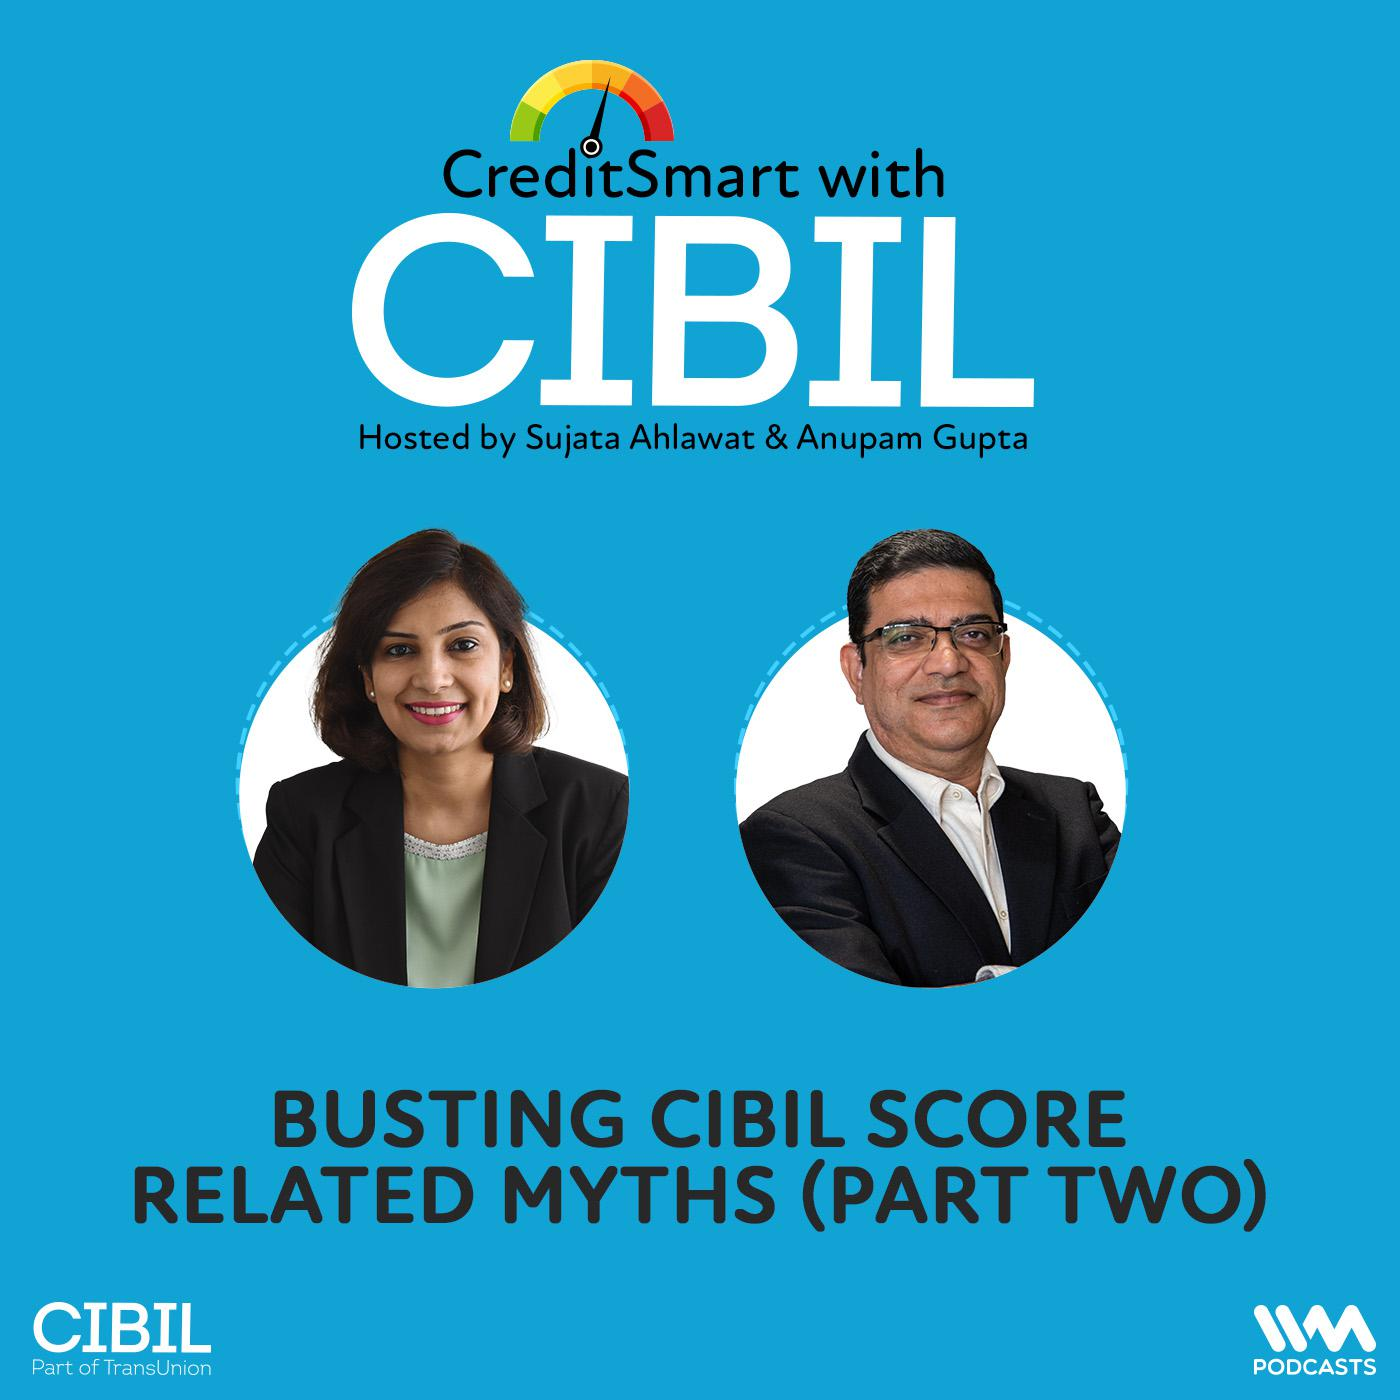 Busting CIBIL Score related myths (Part Two)